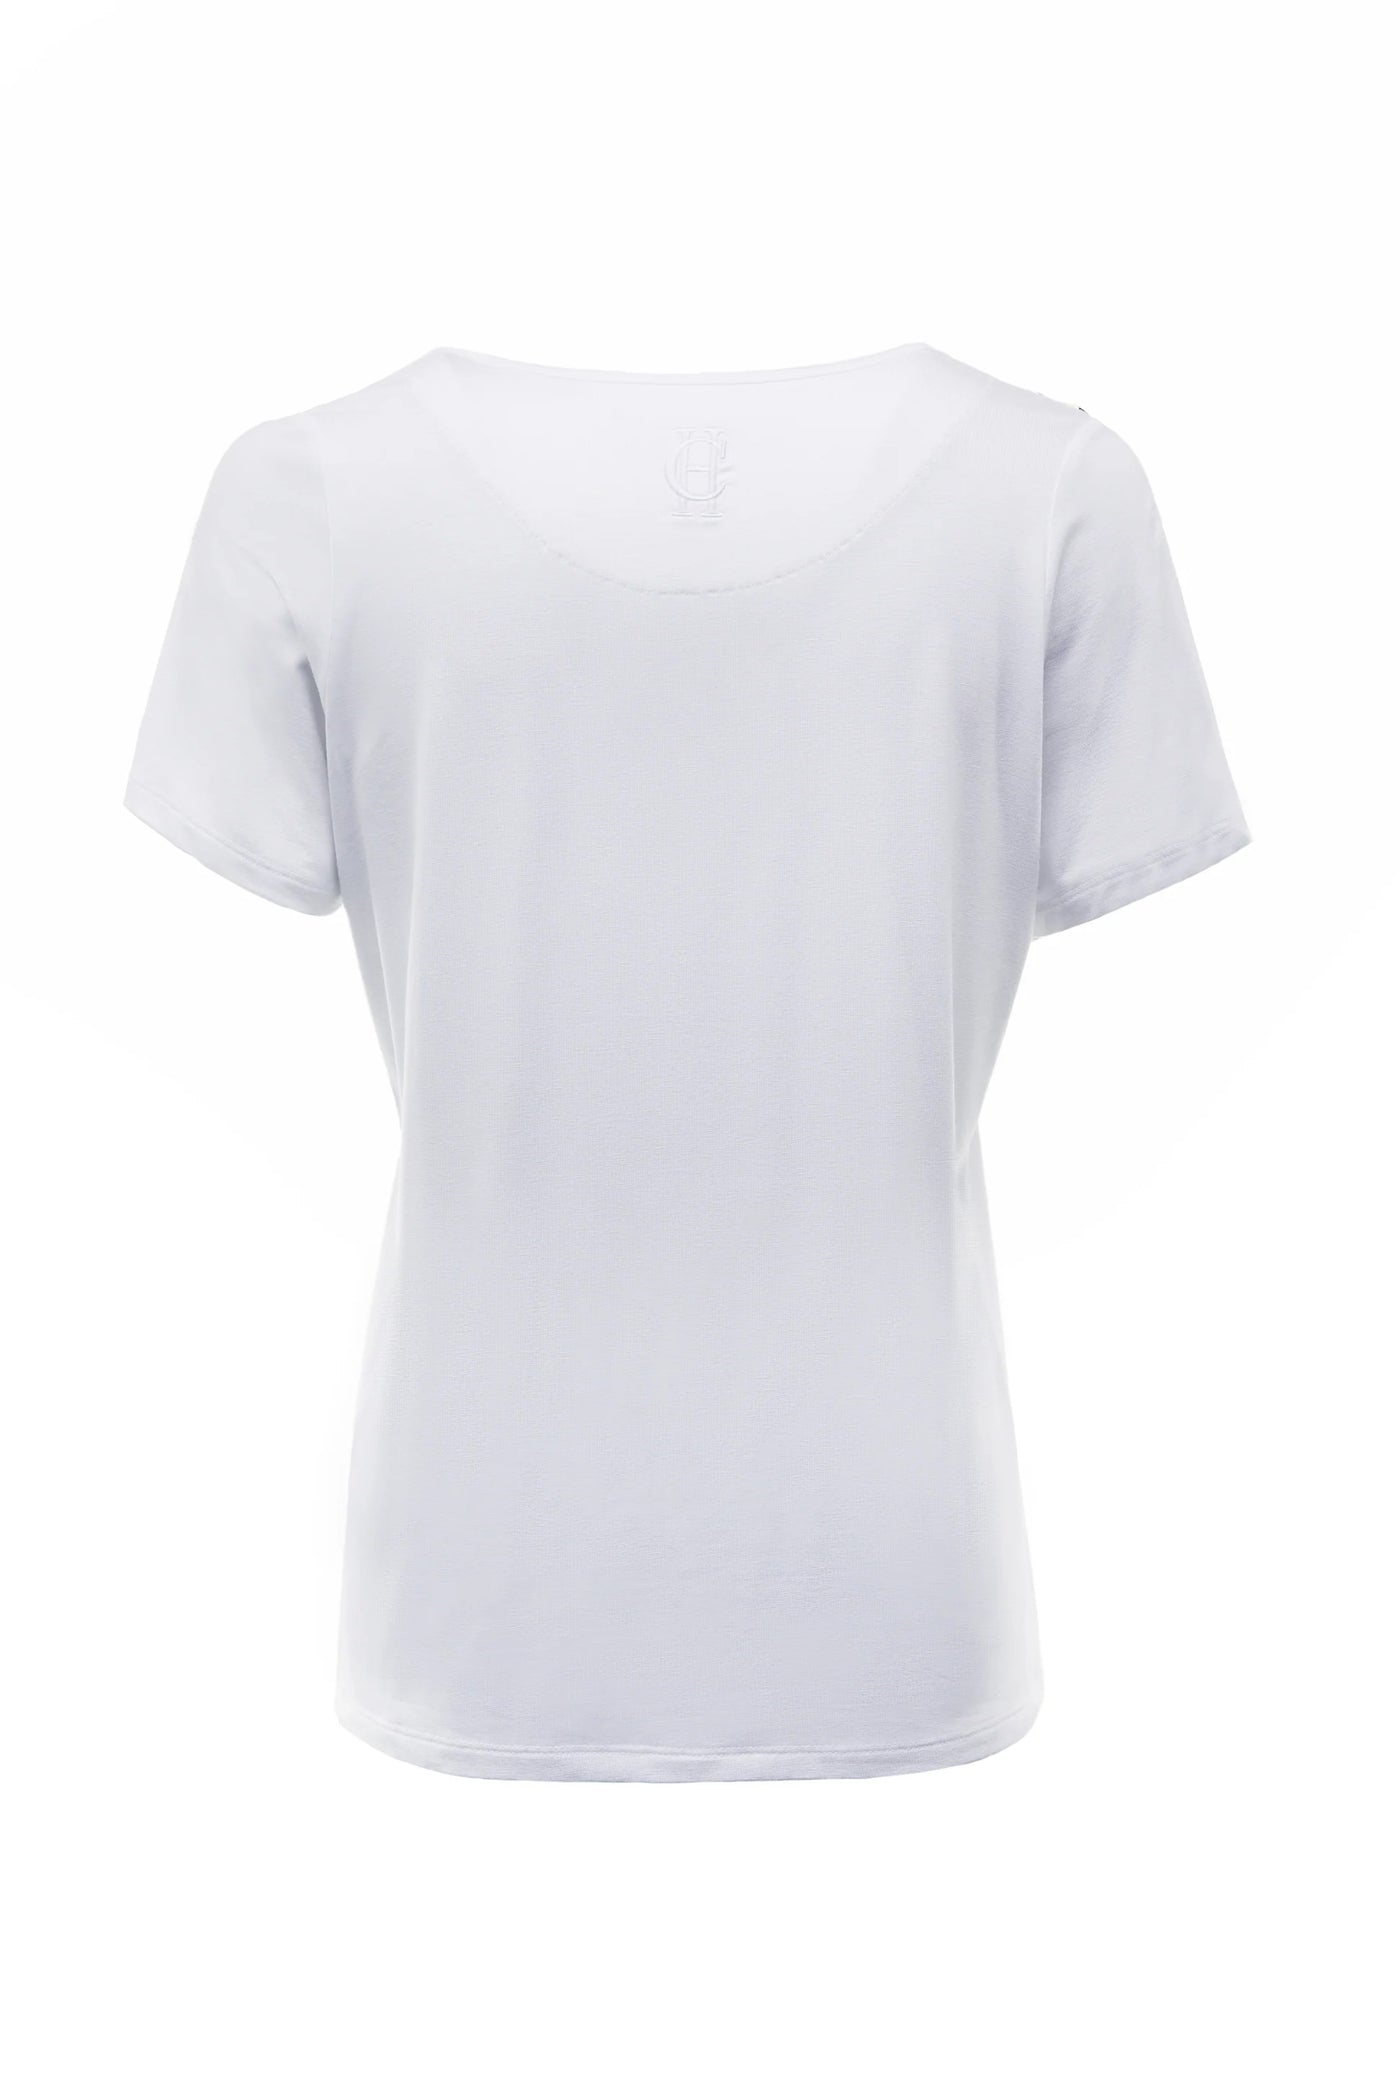 Holland Cooper Relax Fit V Neck Tee in White Back